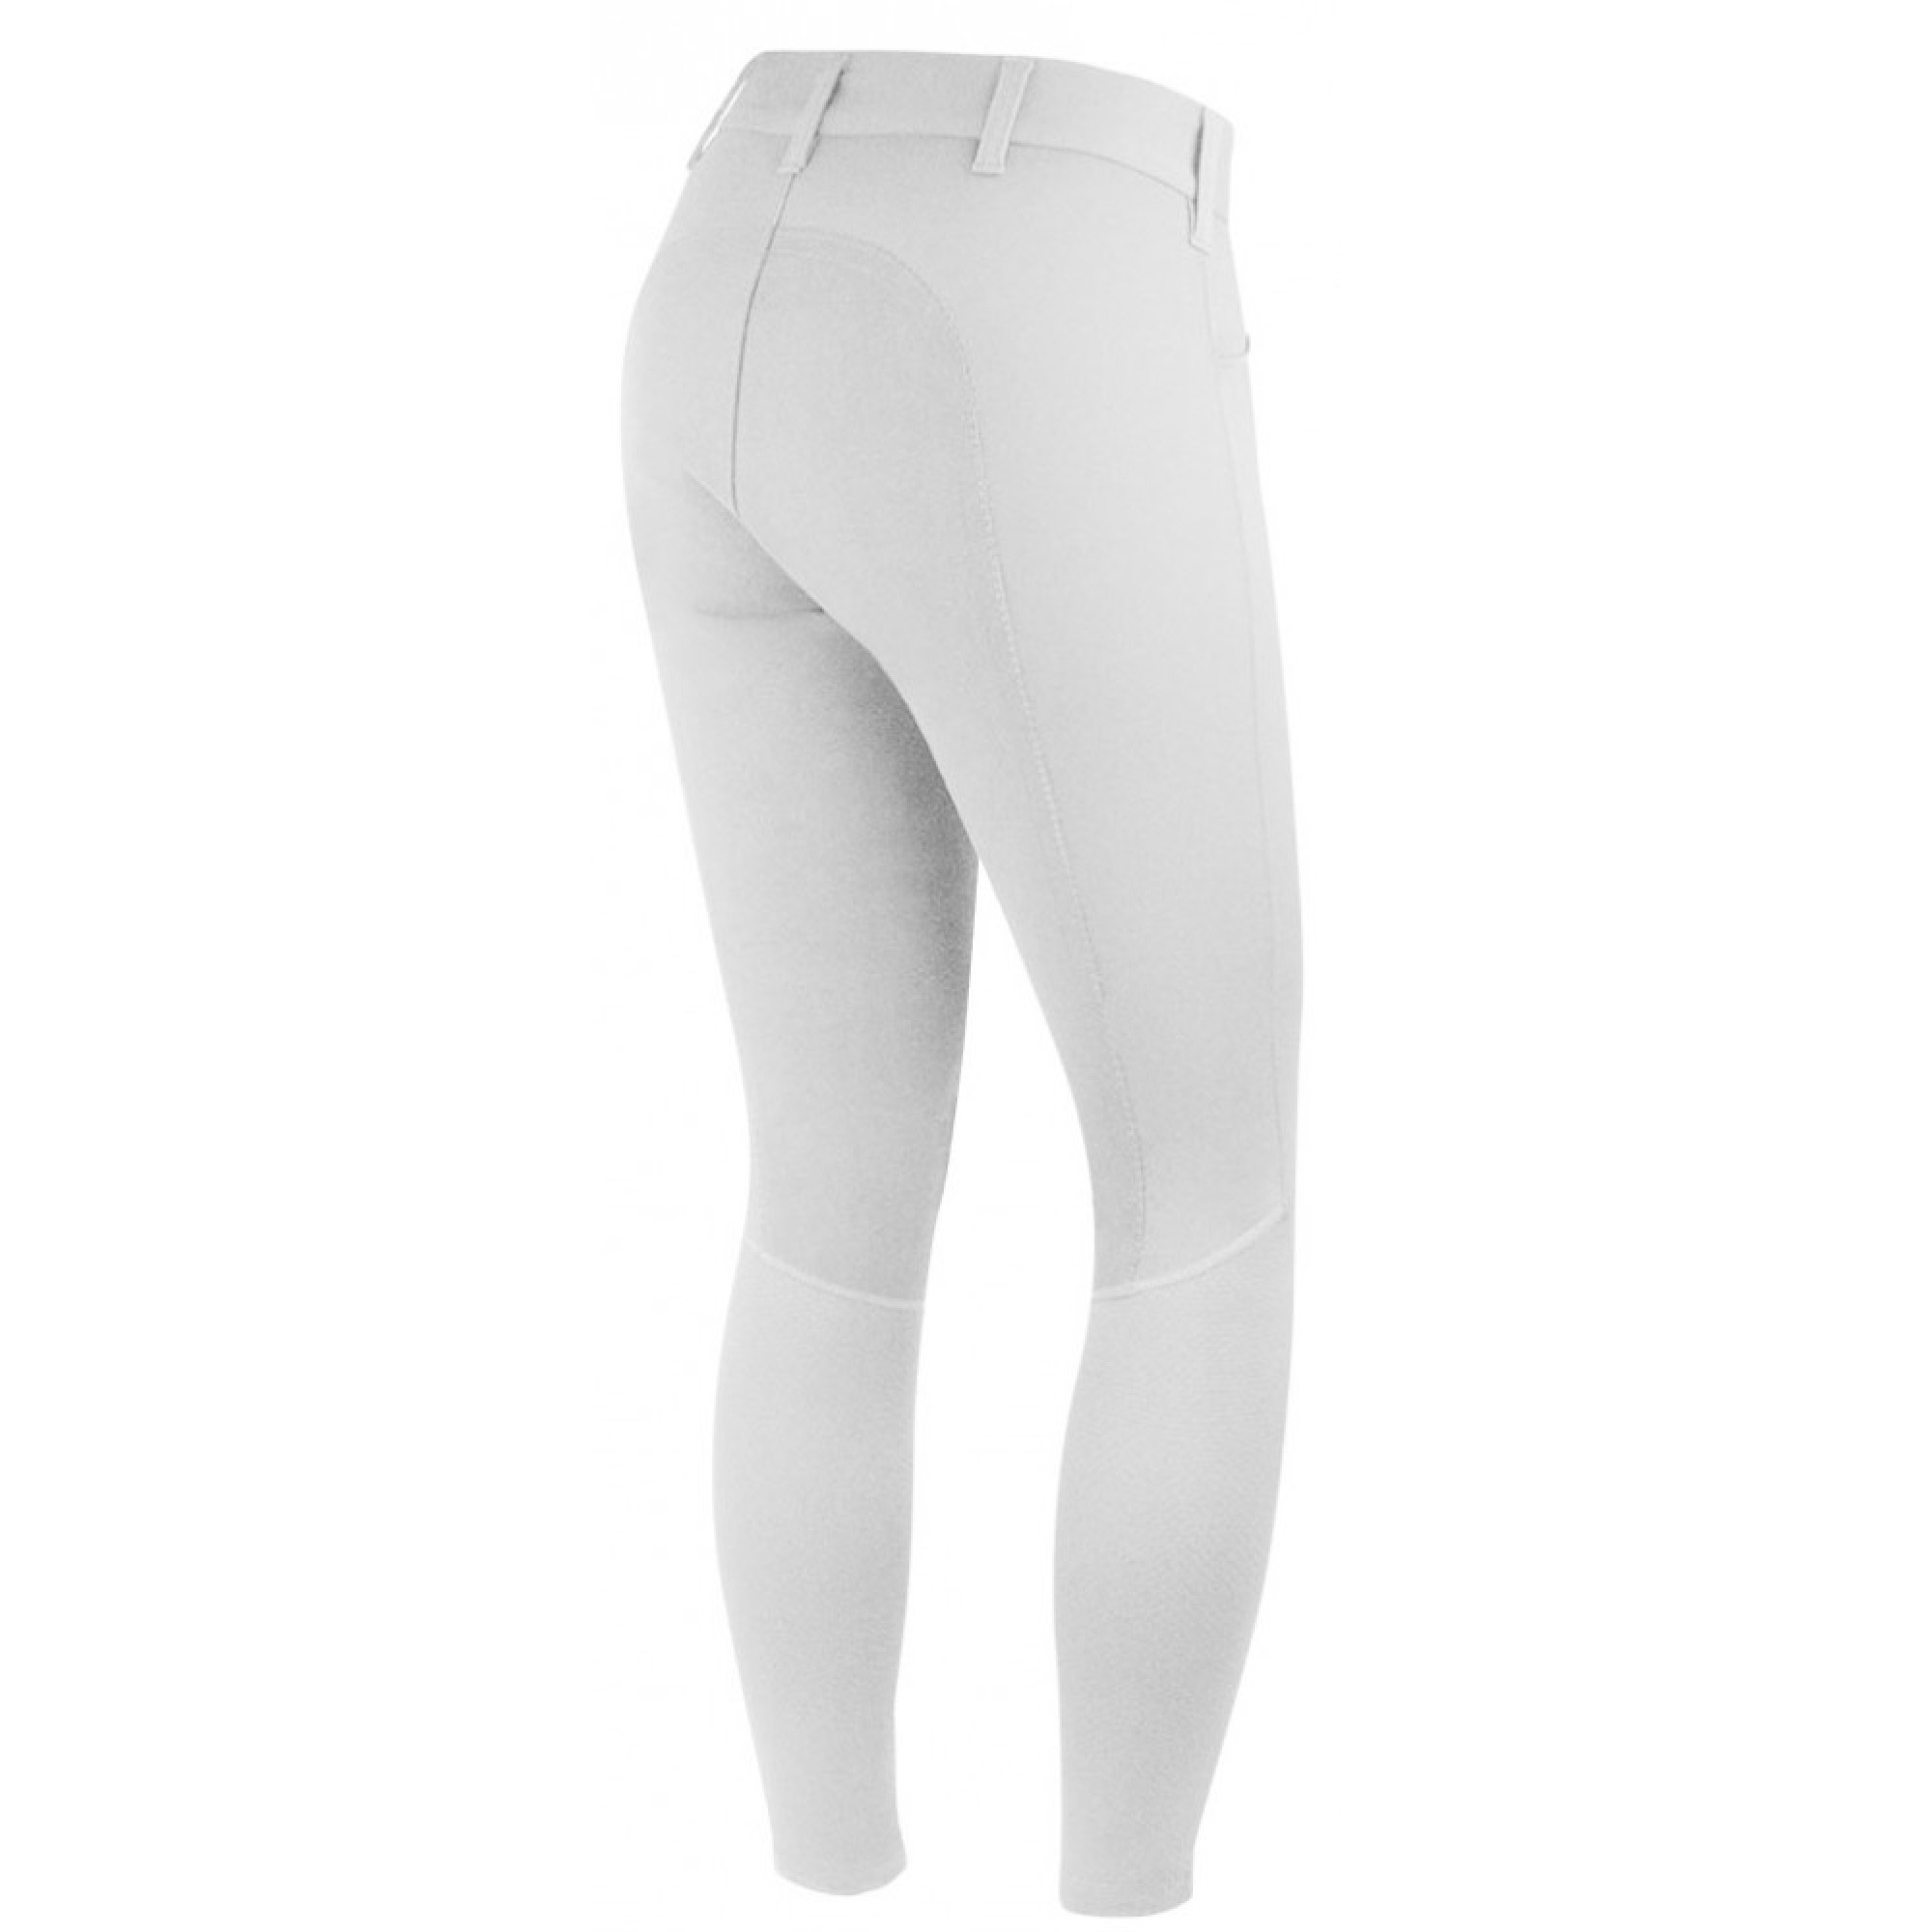 IRIDEON® Competition riding breeches Hampshire, size 34".